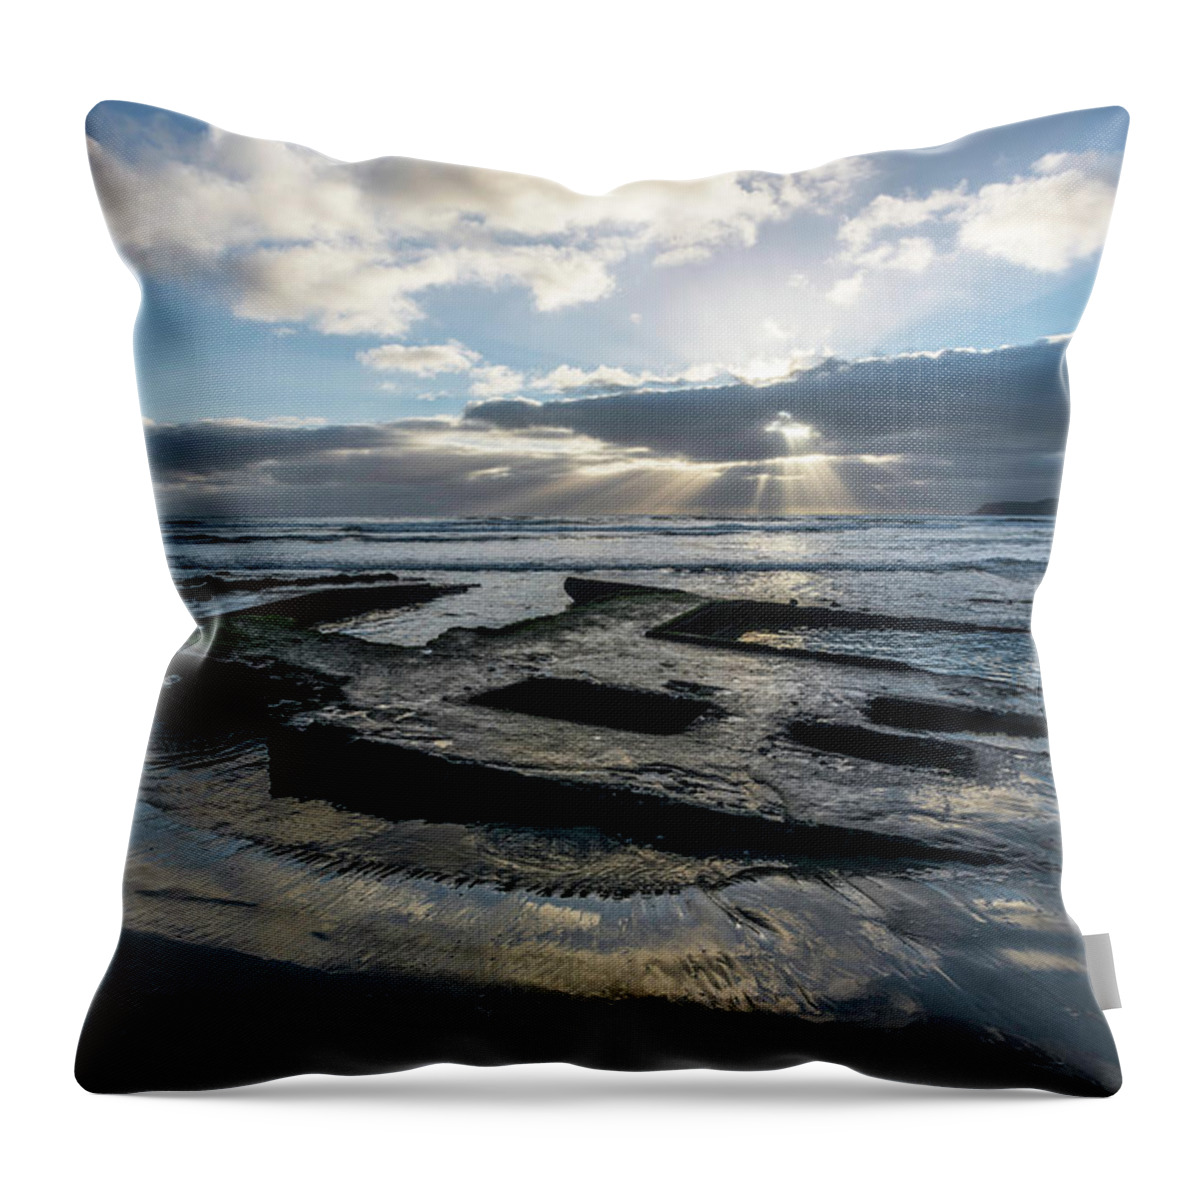  Throw Pillow featuring the photograph Shipwreck and Sun Rays by Scott Cunningham